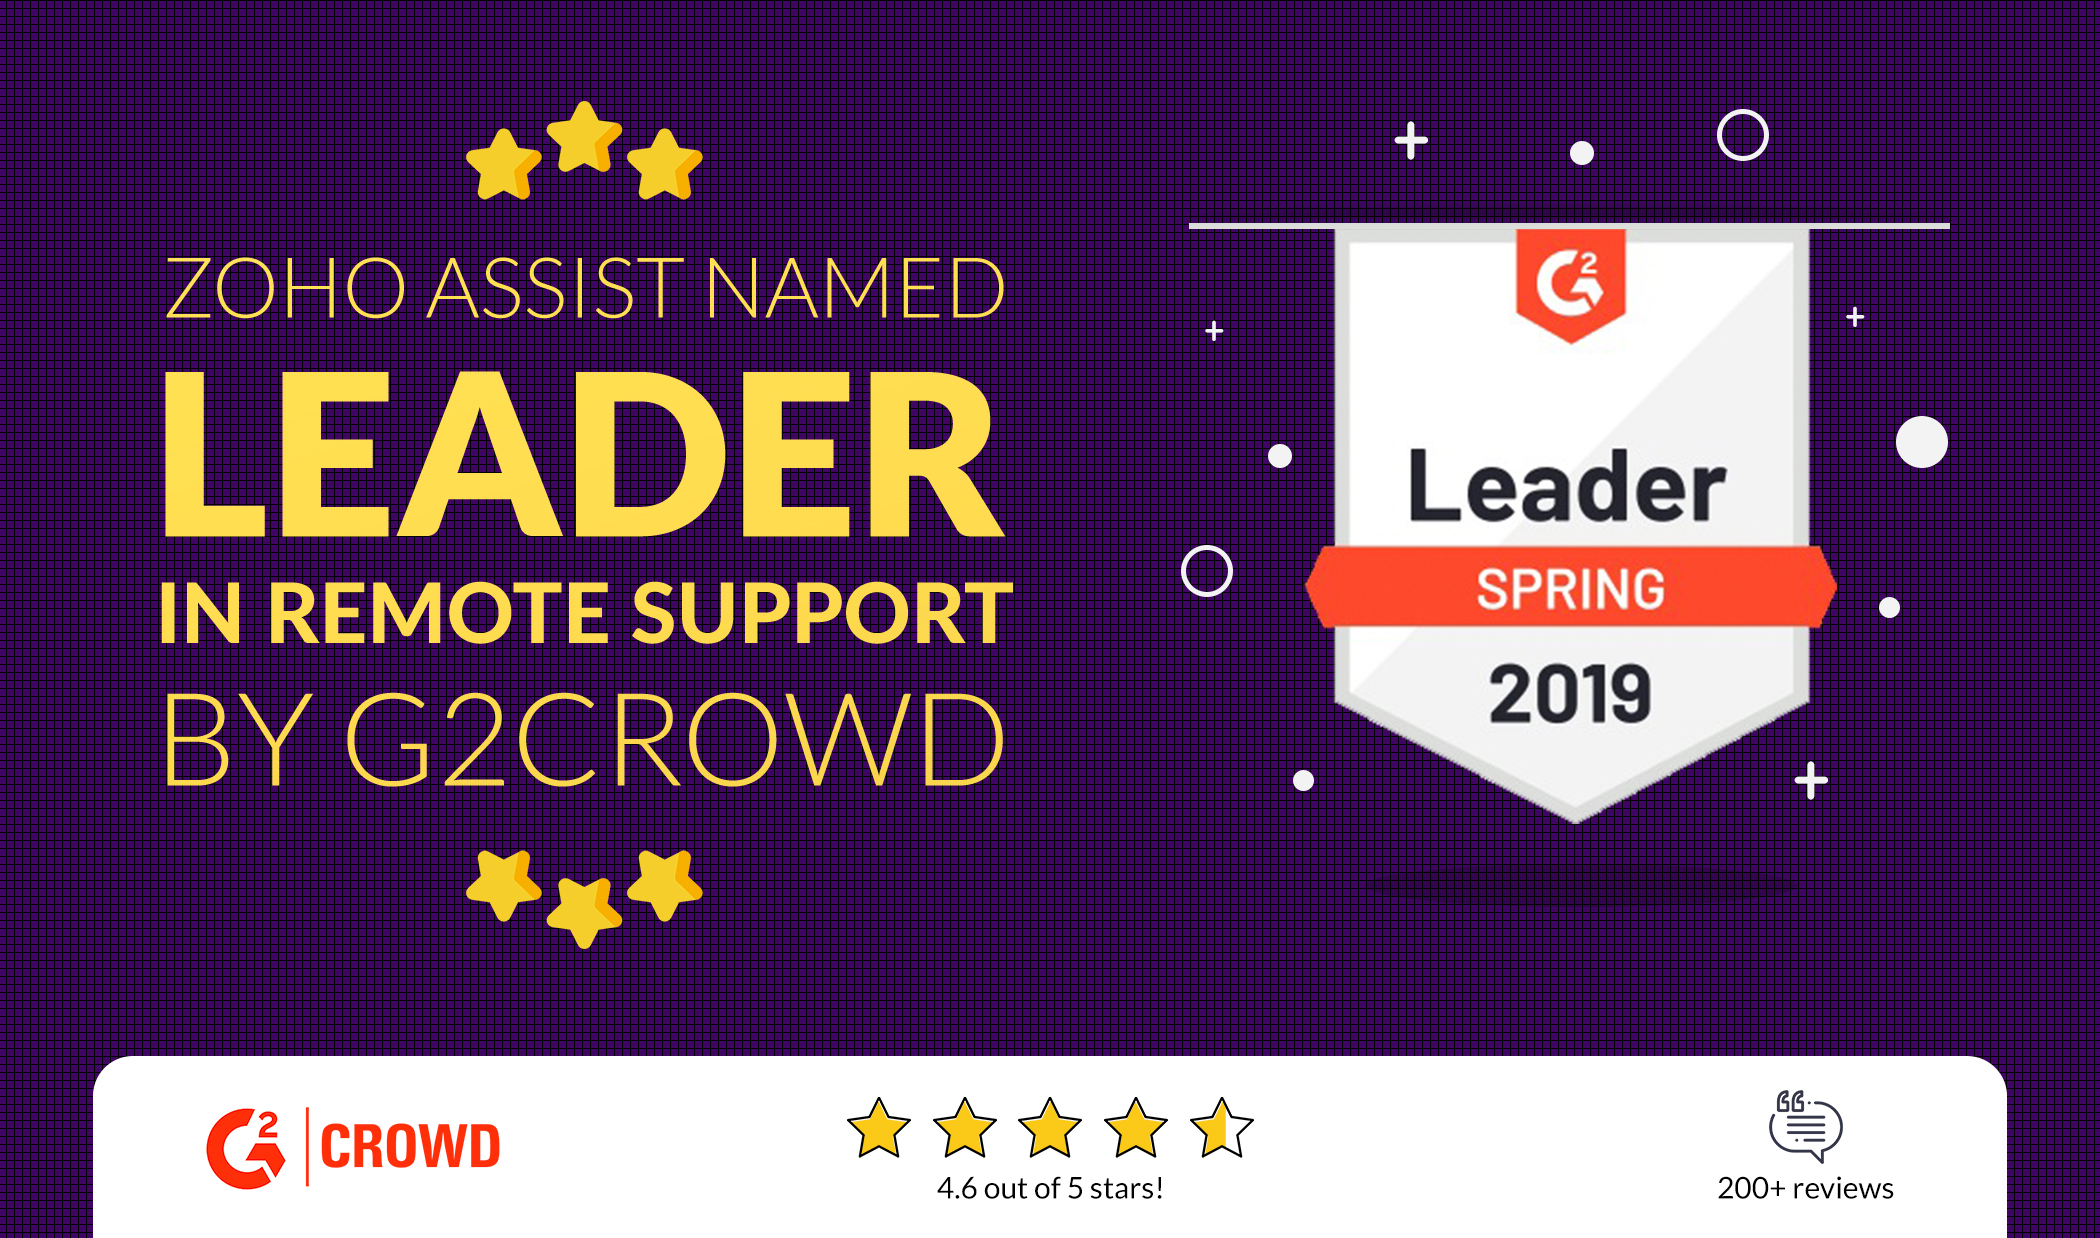 Zoho Assist tops two categories in G2 Crowd for the fourth time in a row!